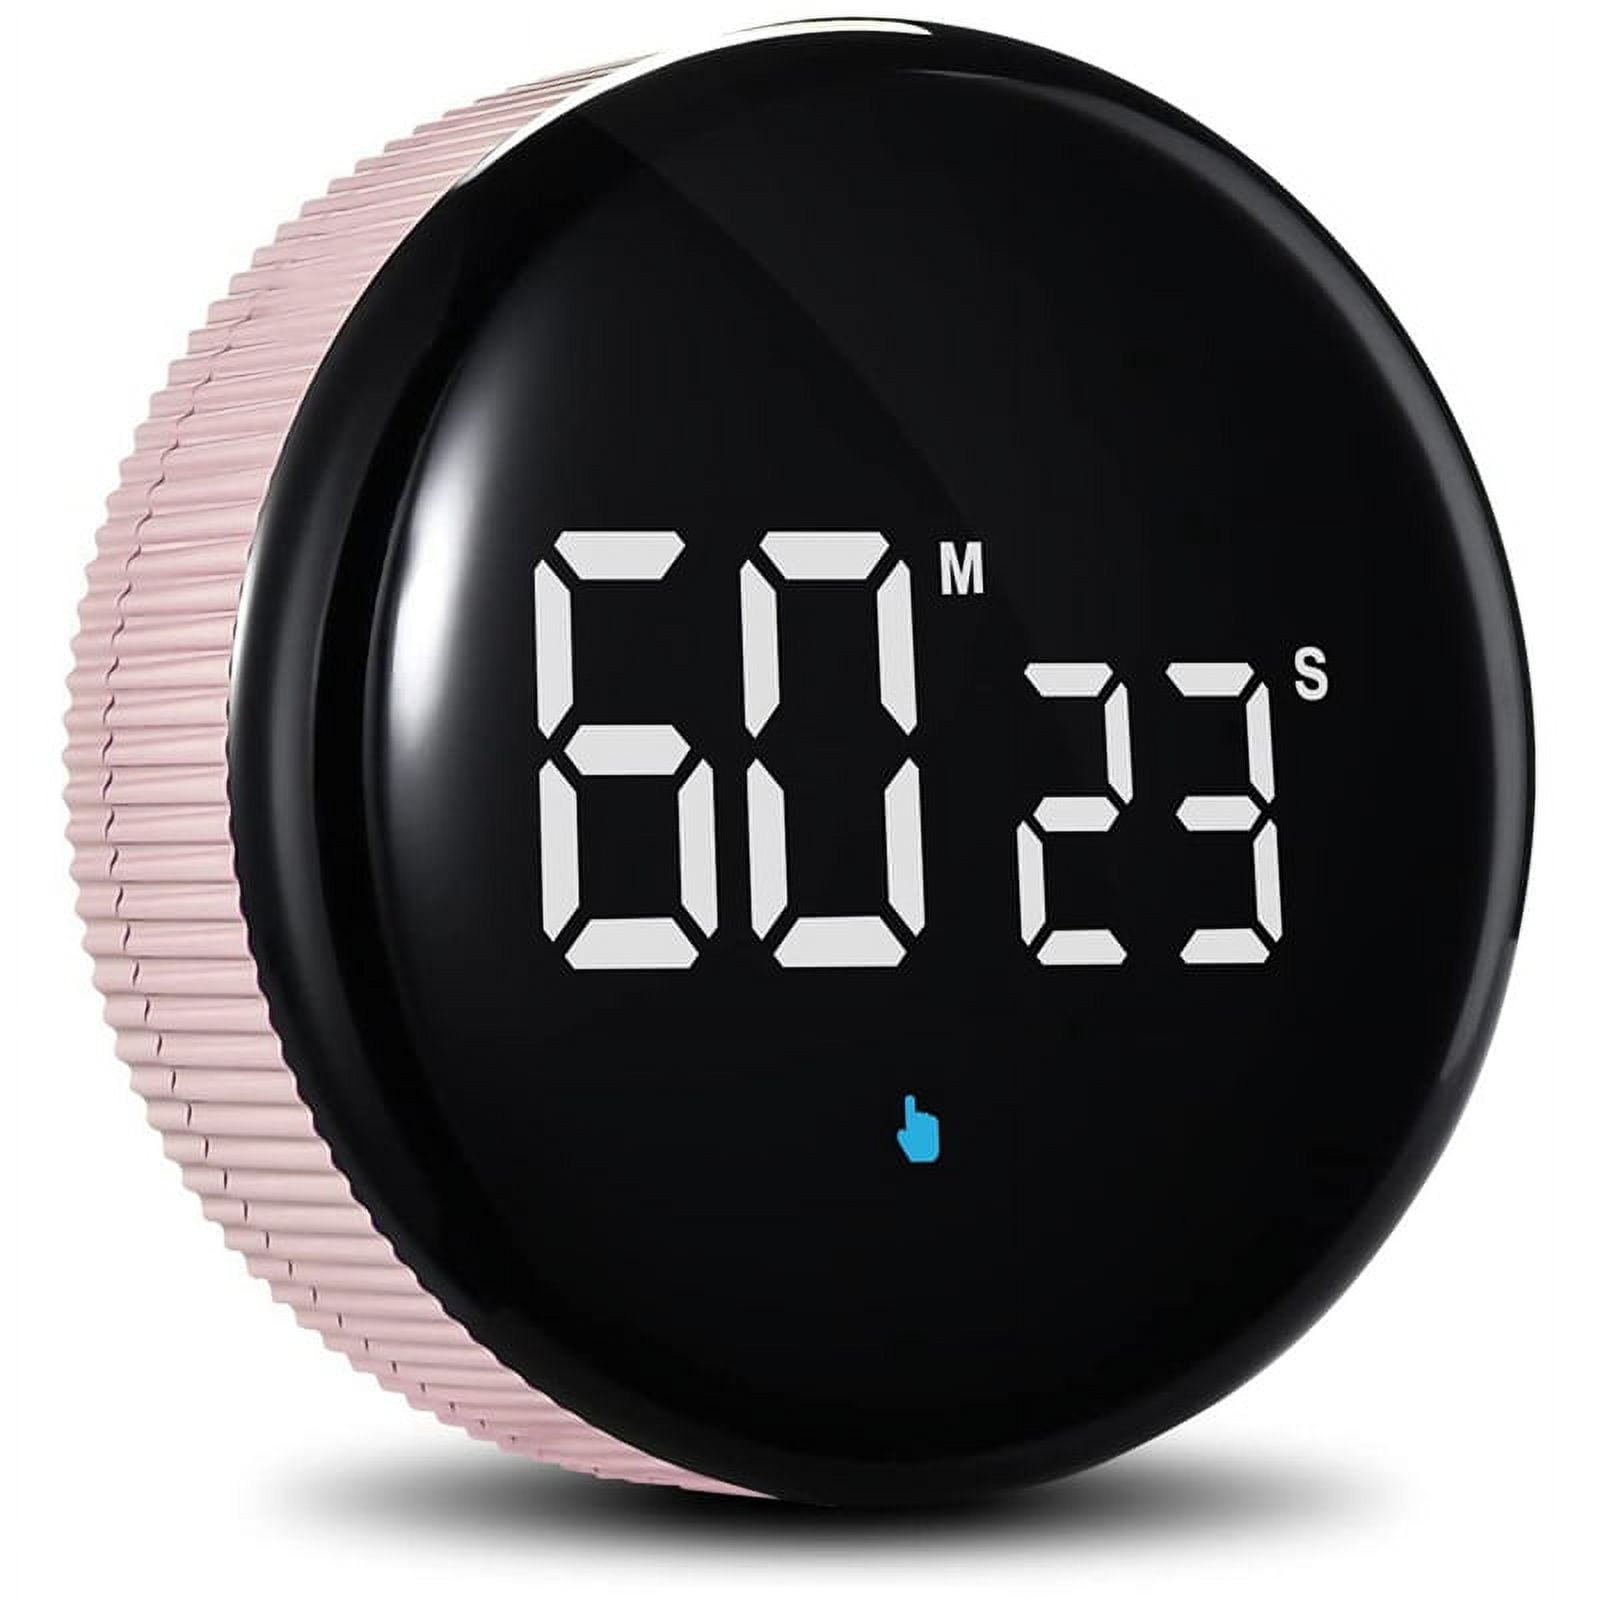 Rechargeable Kitchen ,Magnetic Productivity Timer with LED Display,Digital  Classroom Visual Timer (Pink) 